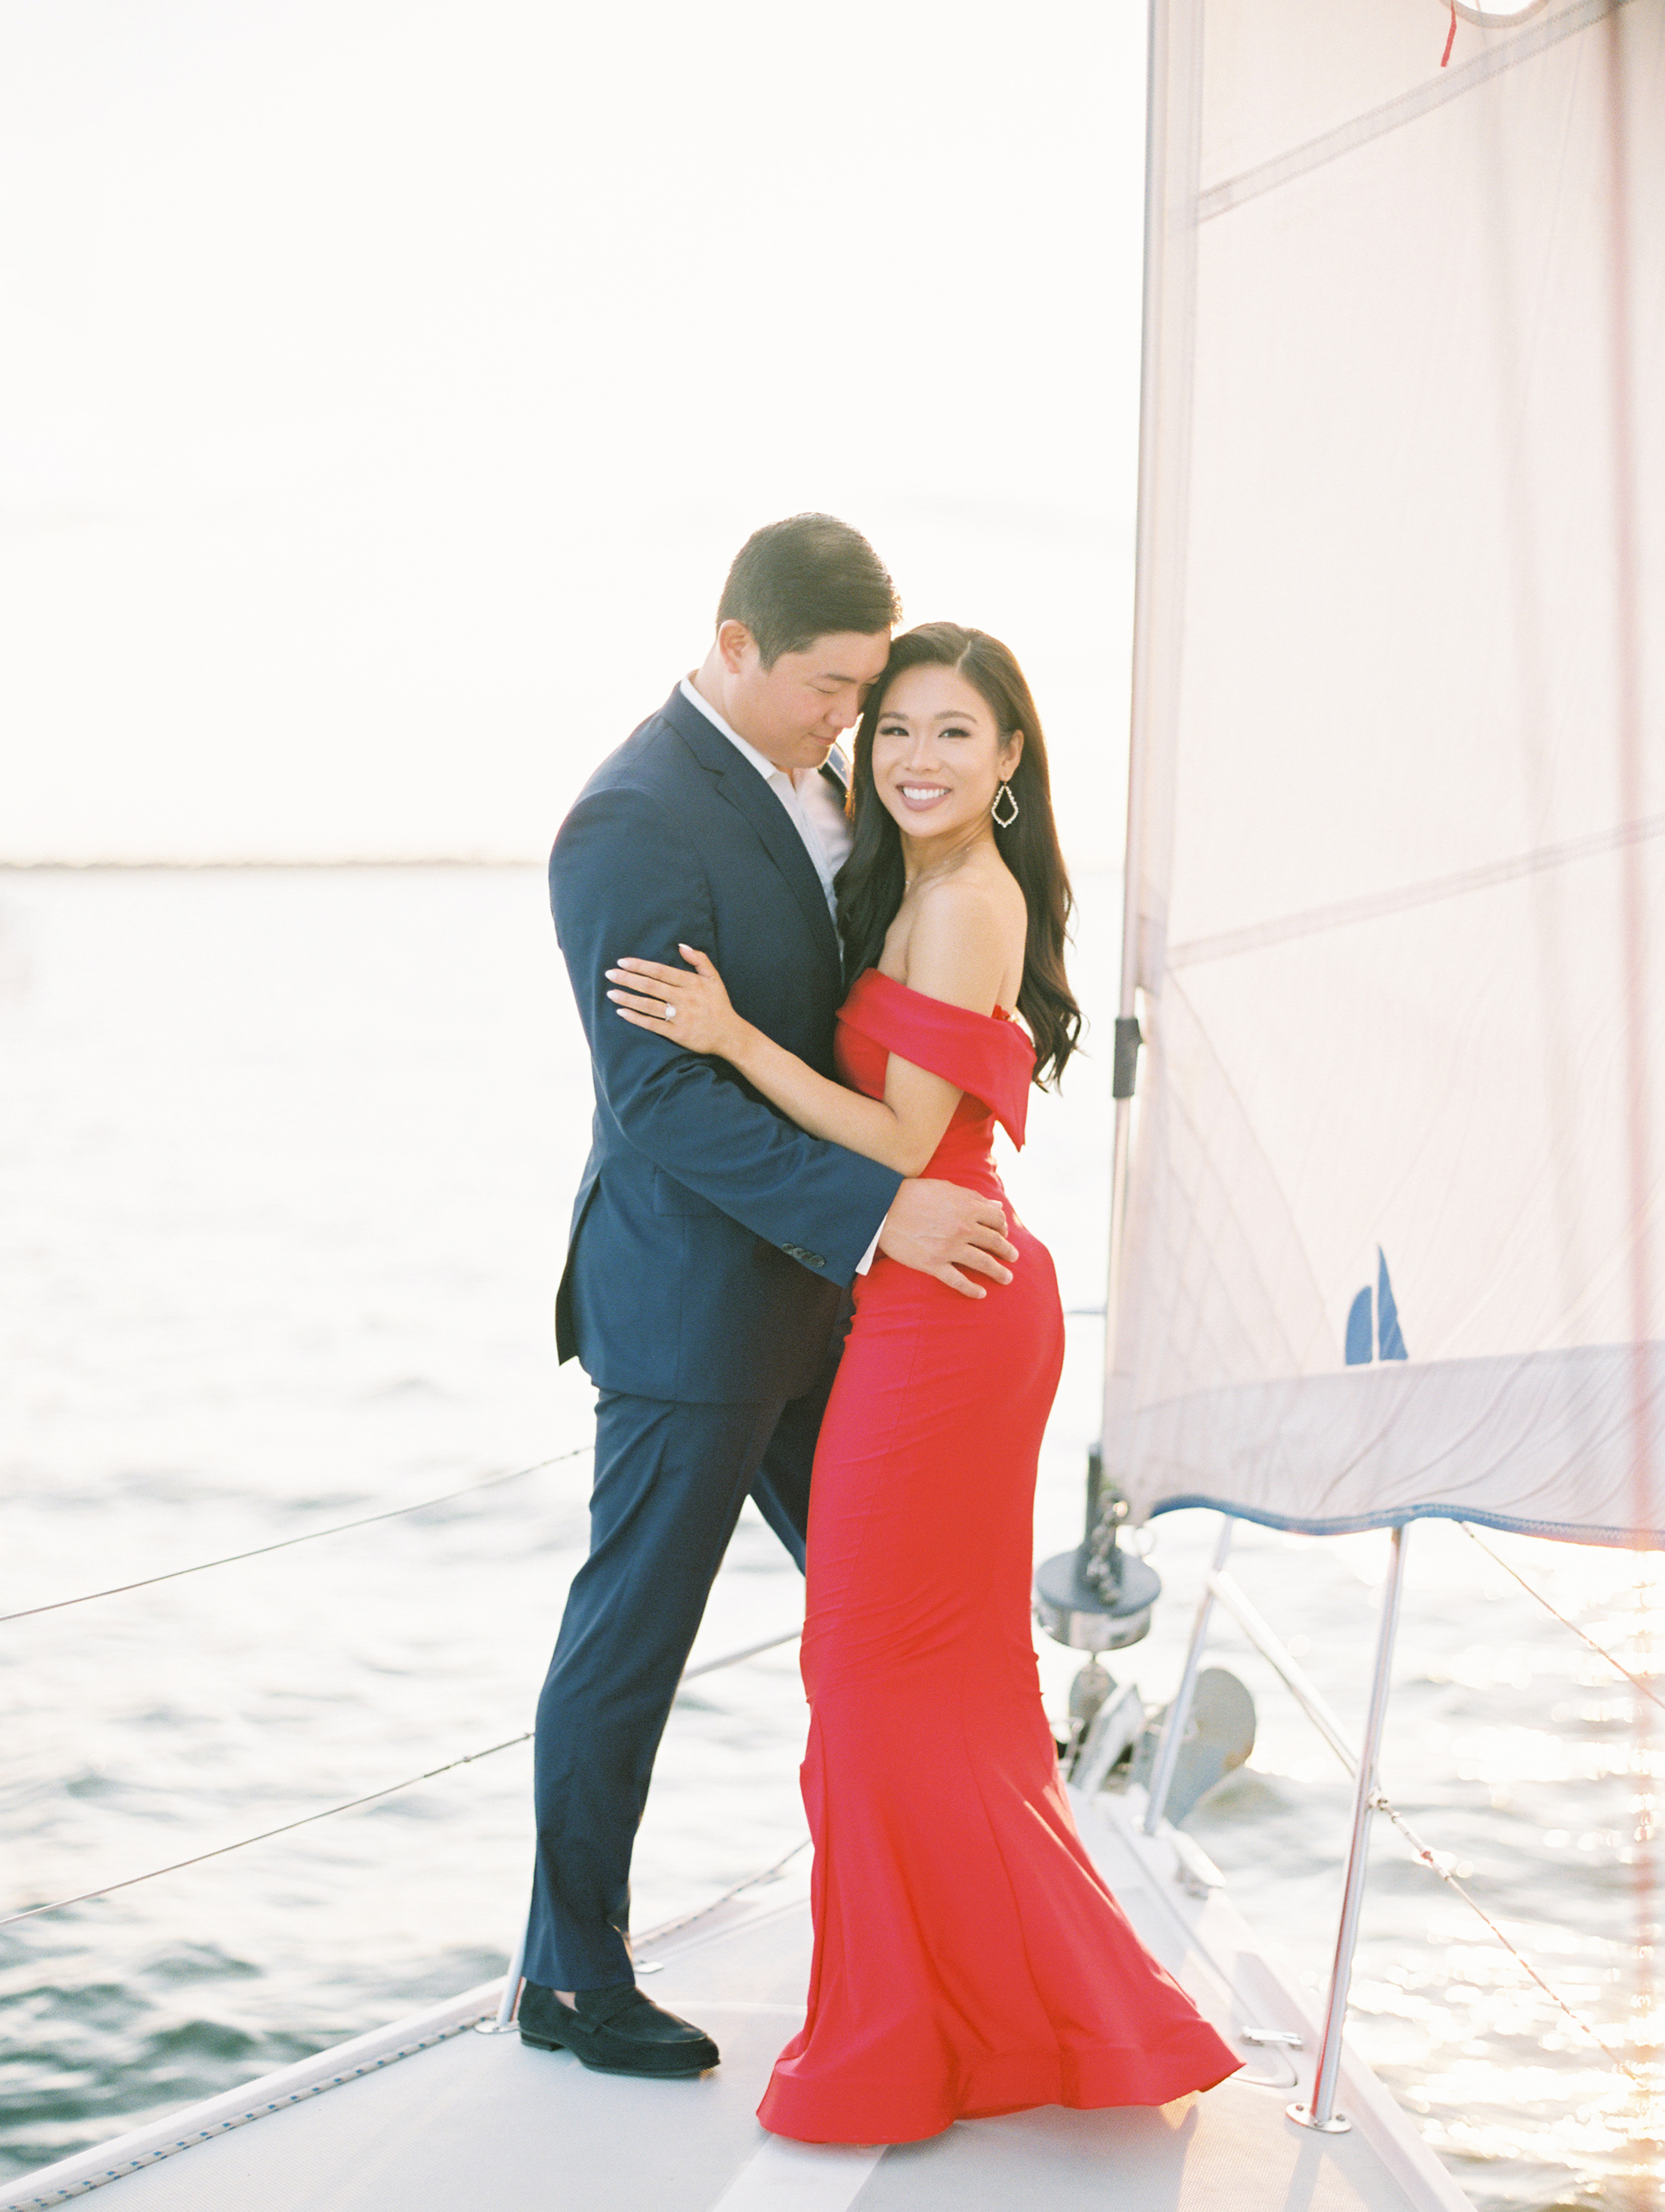 blogger hoang-kim cung shares her engagement shoot outfits from sailboat engagement shoot